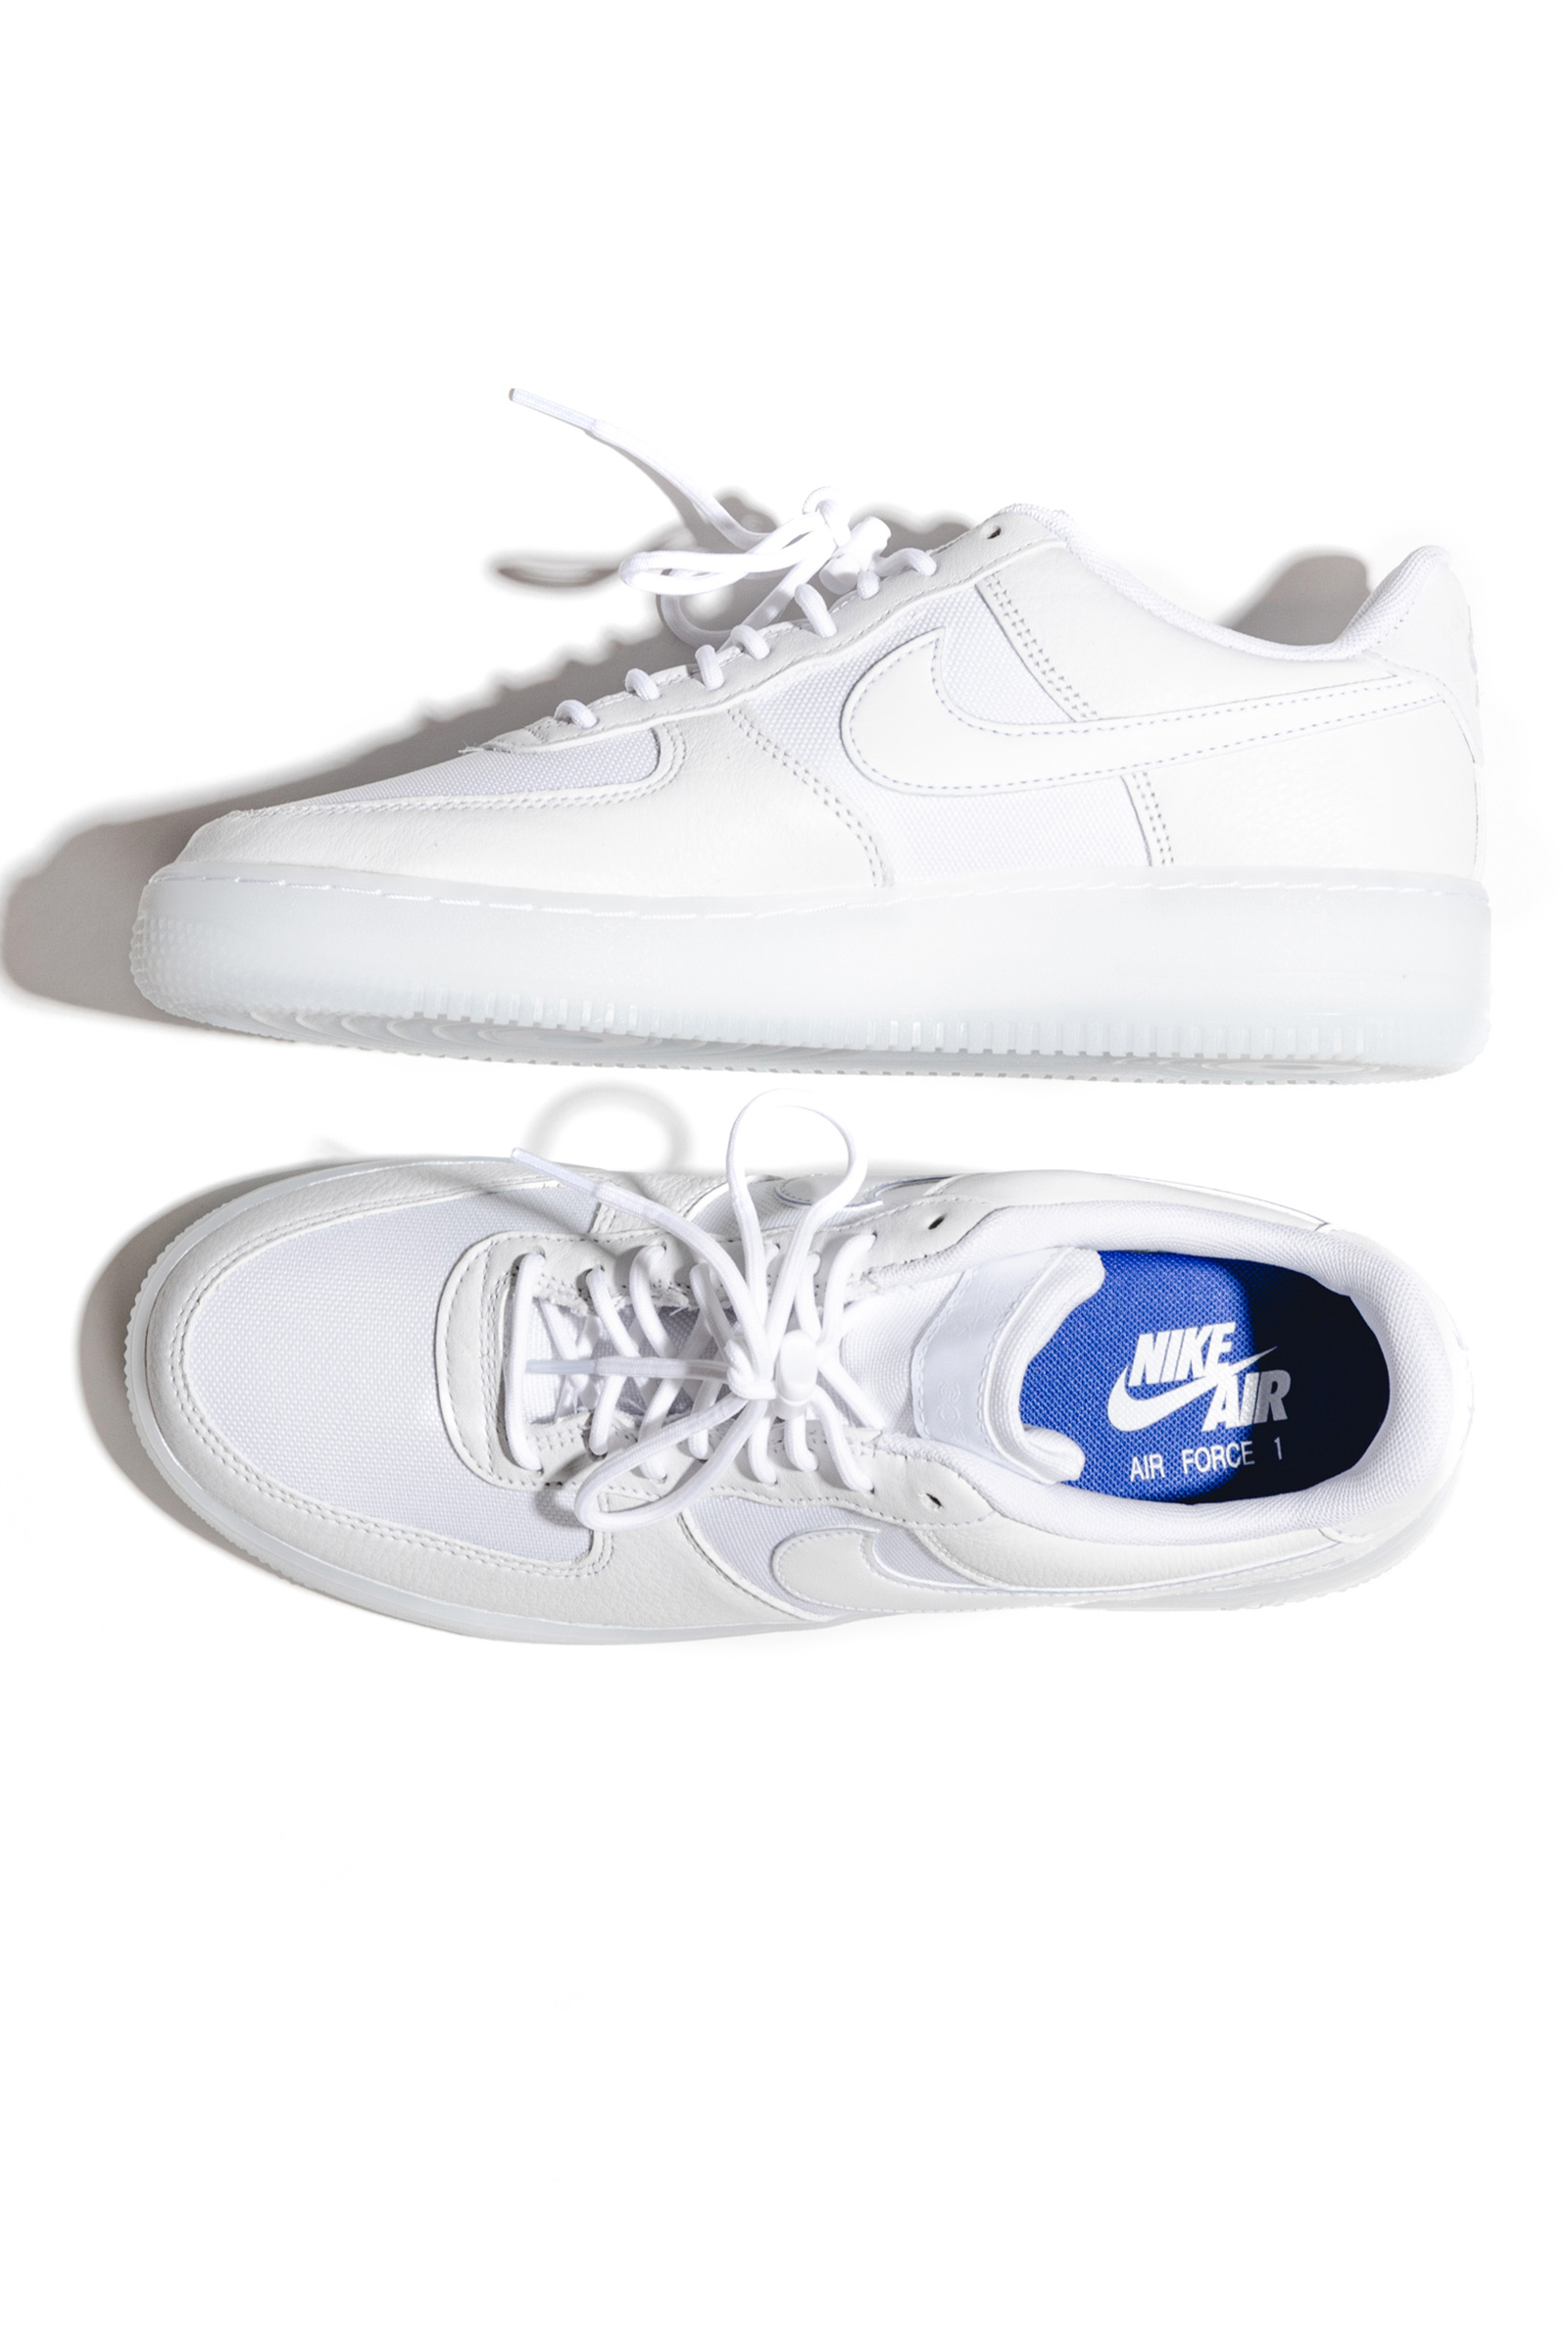 SNEAKERS TEXT] NIKE AIR FORCE 1 GTX 